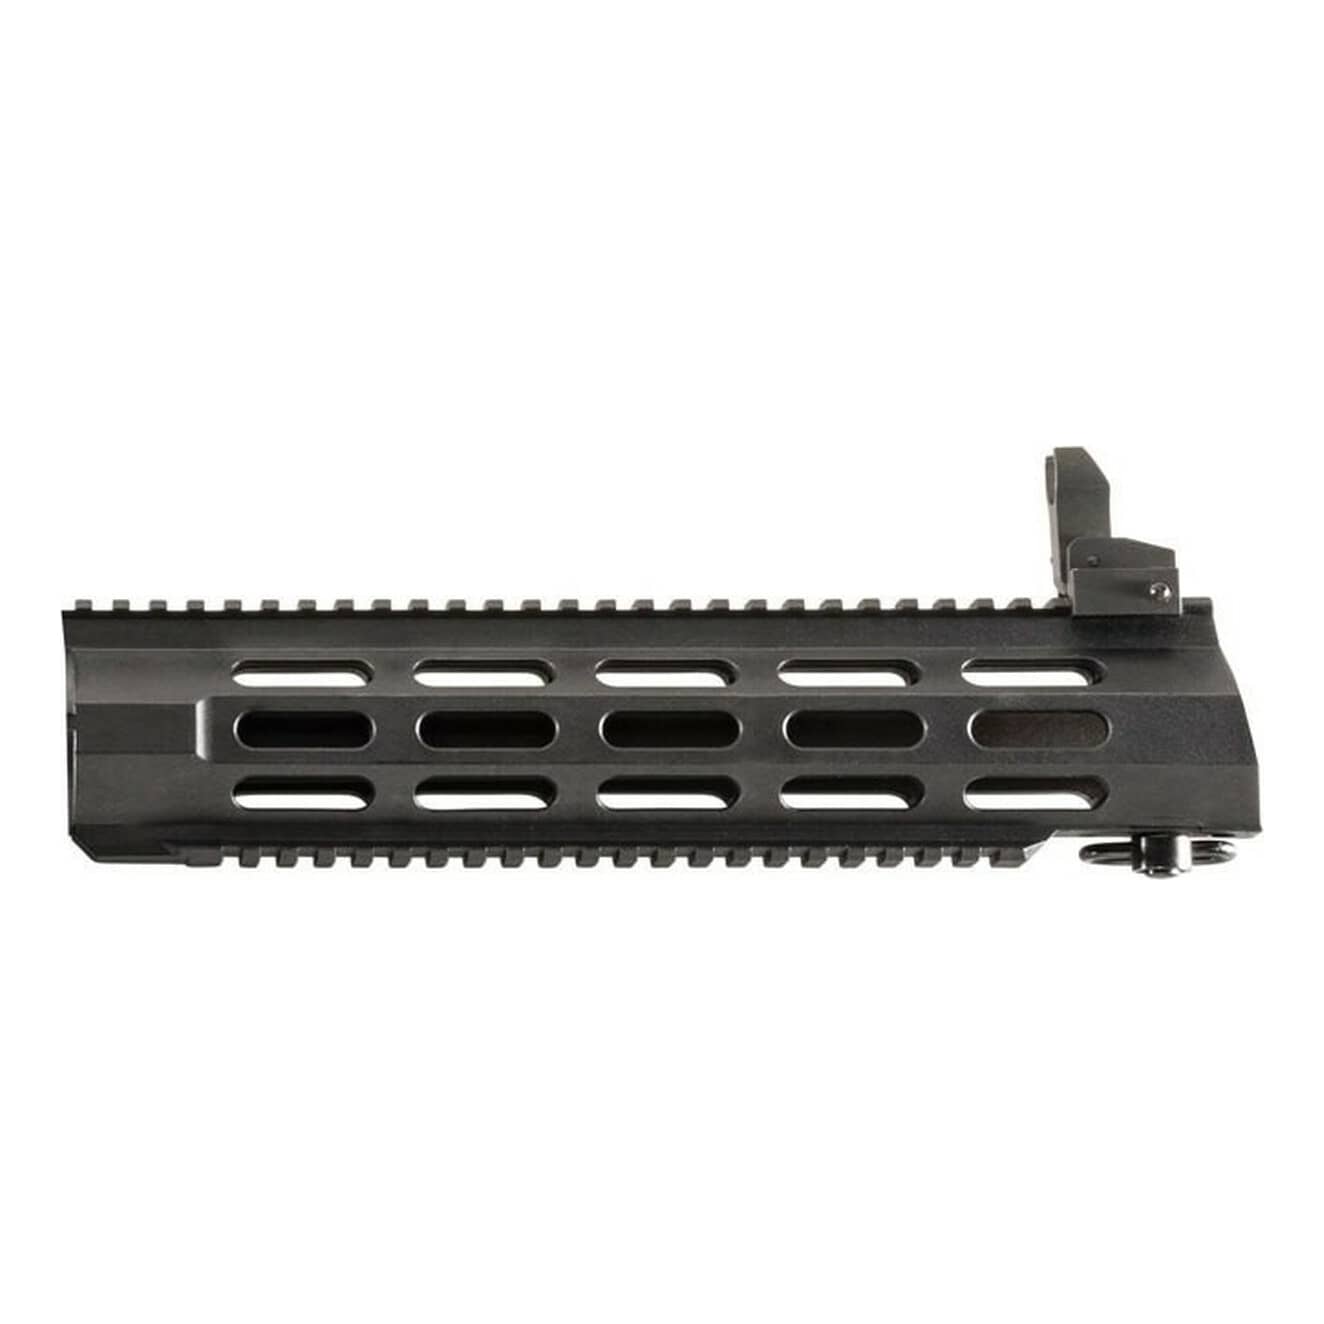 Archangel® Ruger® 10/22 Conversion Stock with Extended Monolithic Rail Forend